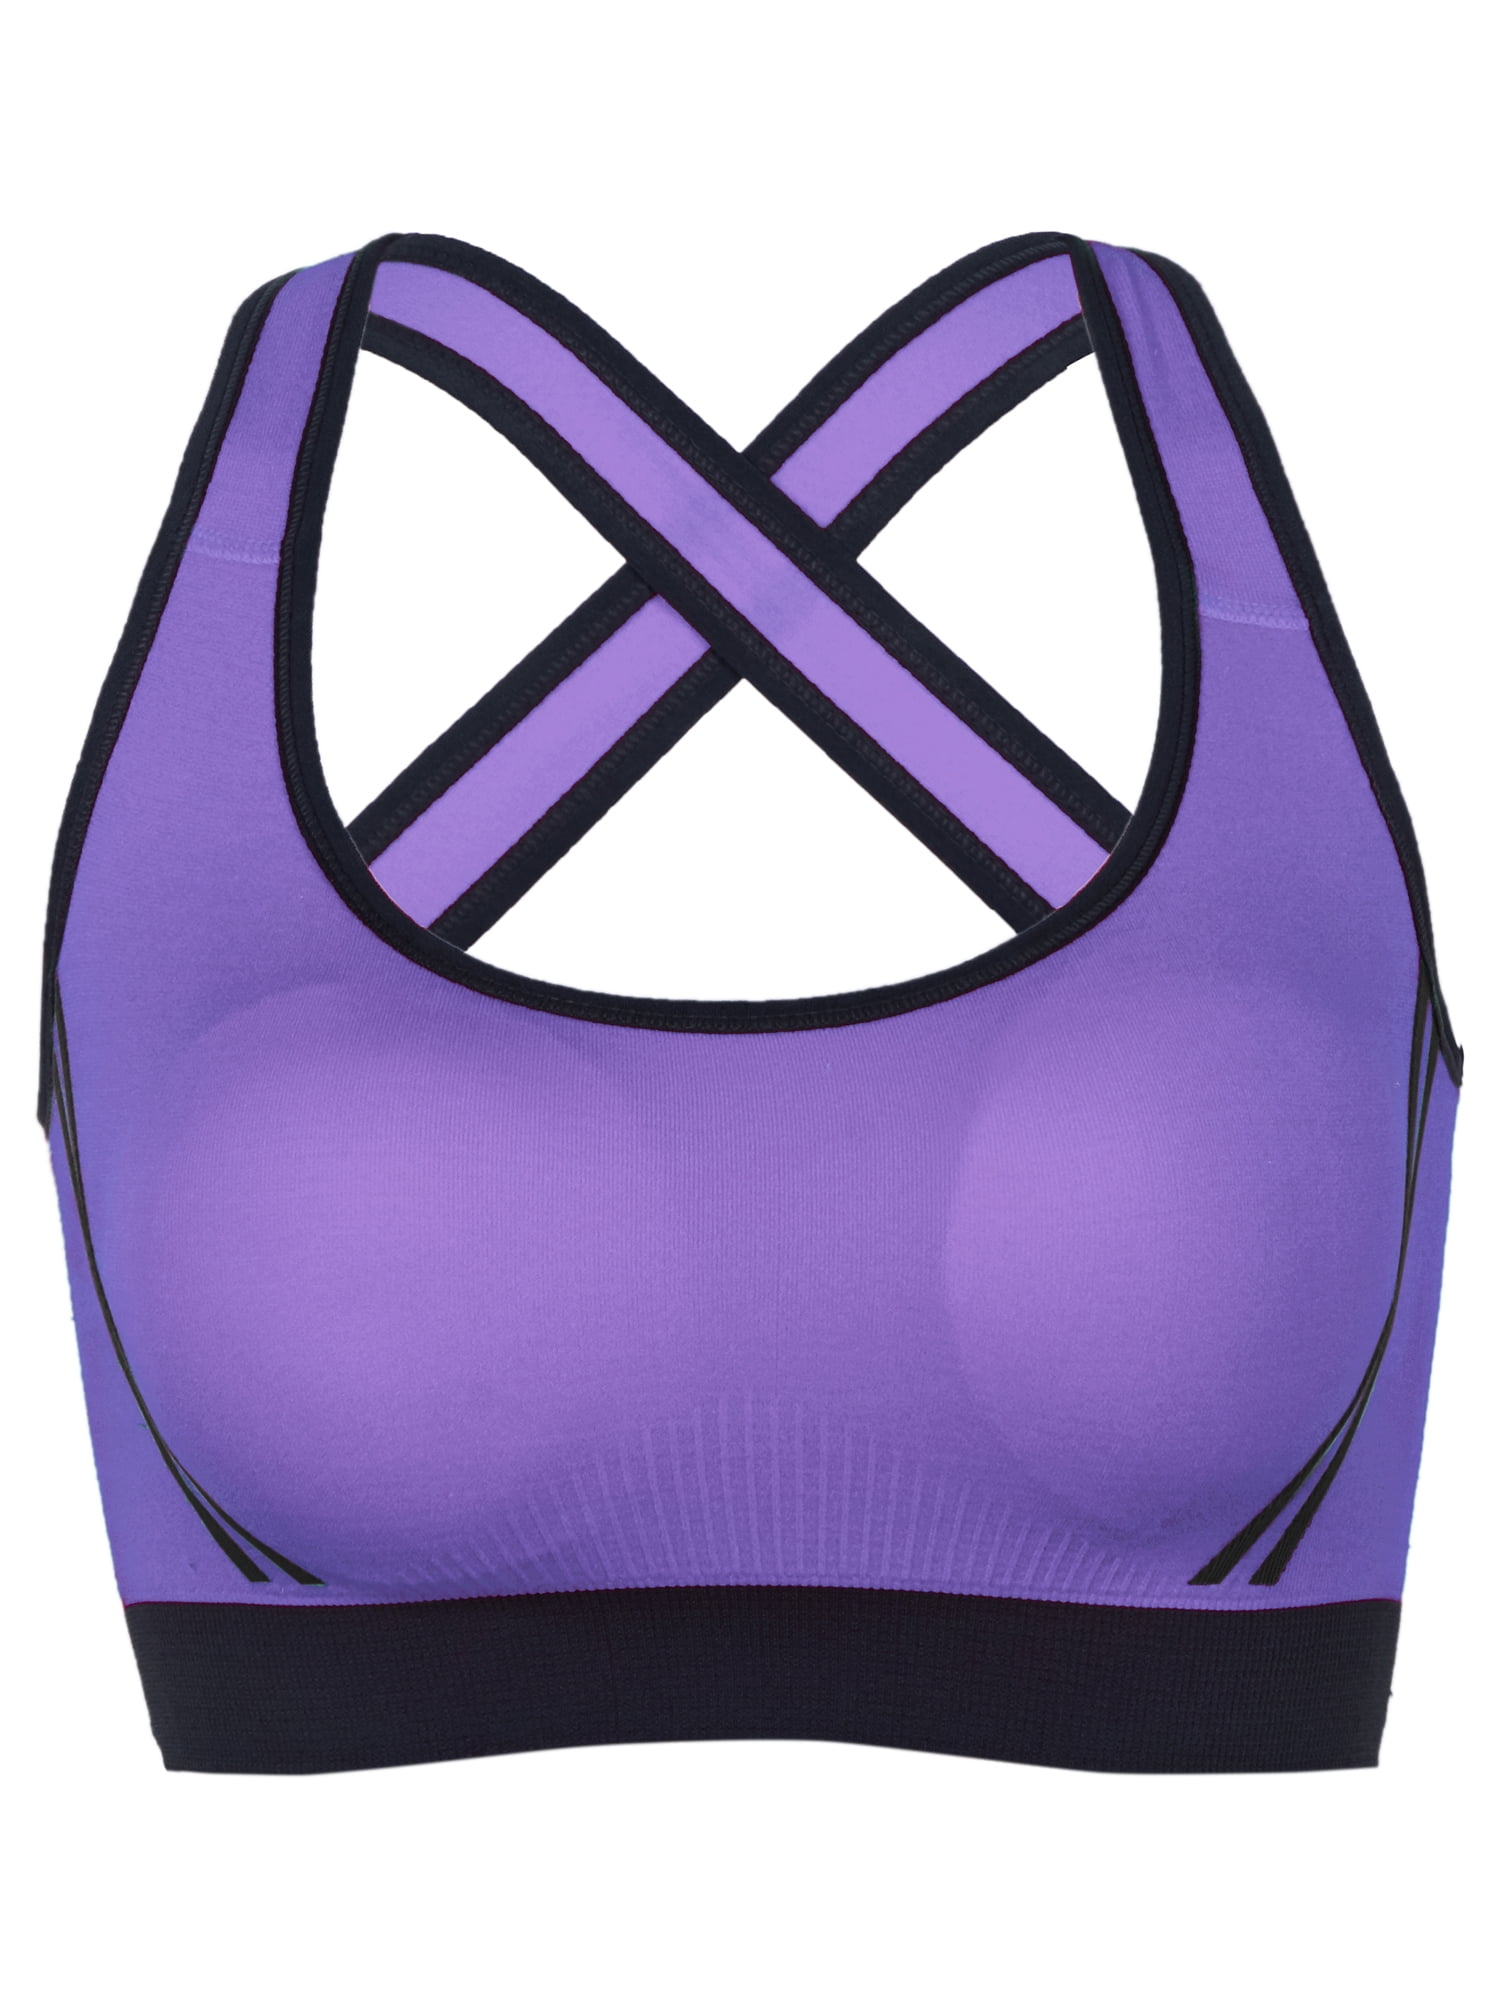  ZYLDDP Sports Bra Yoga Fitness Athletic Wear Elastic Breathable  Bras for Underwear Women's Bra (Color : Purple, Size : Large) : Clothing,  Shoes & Jewelry